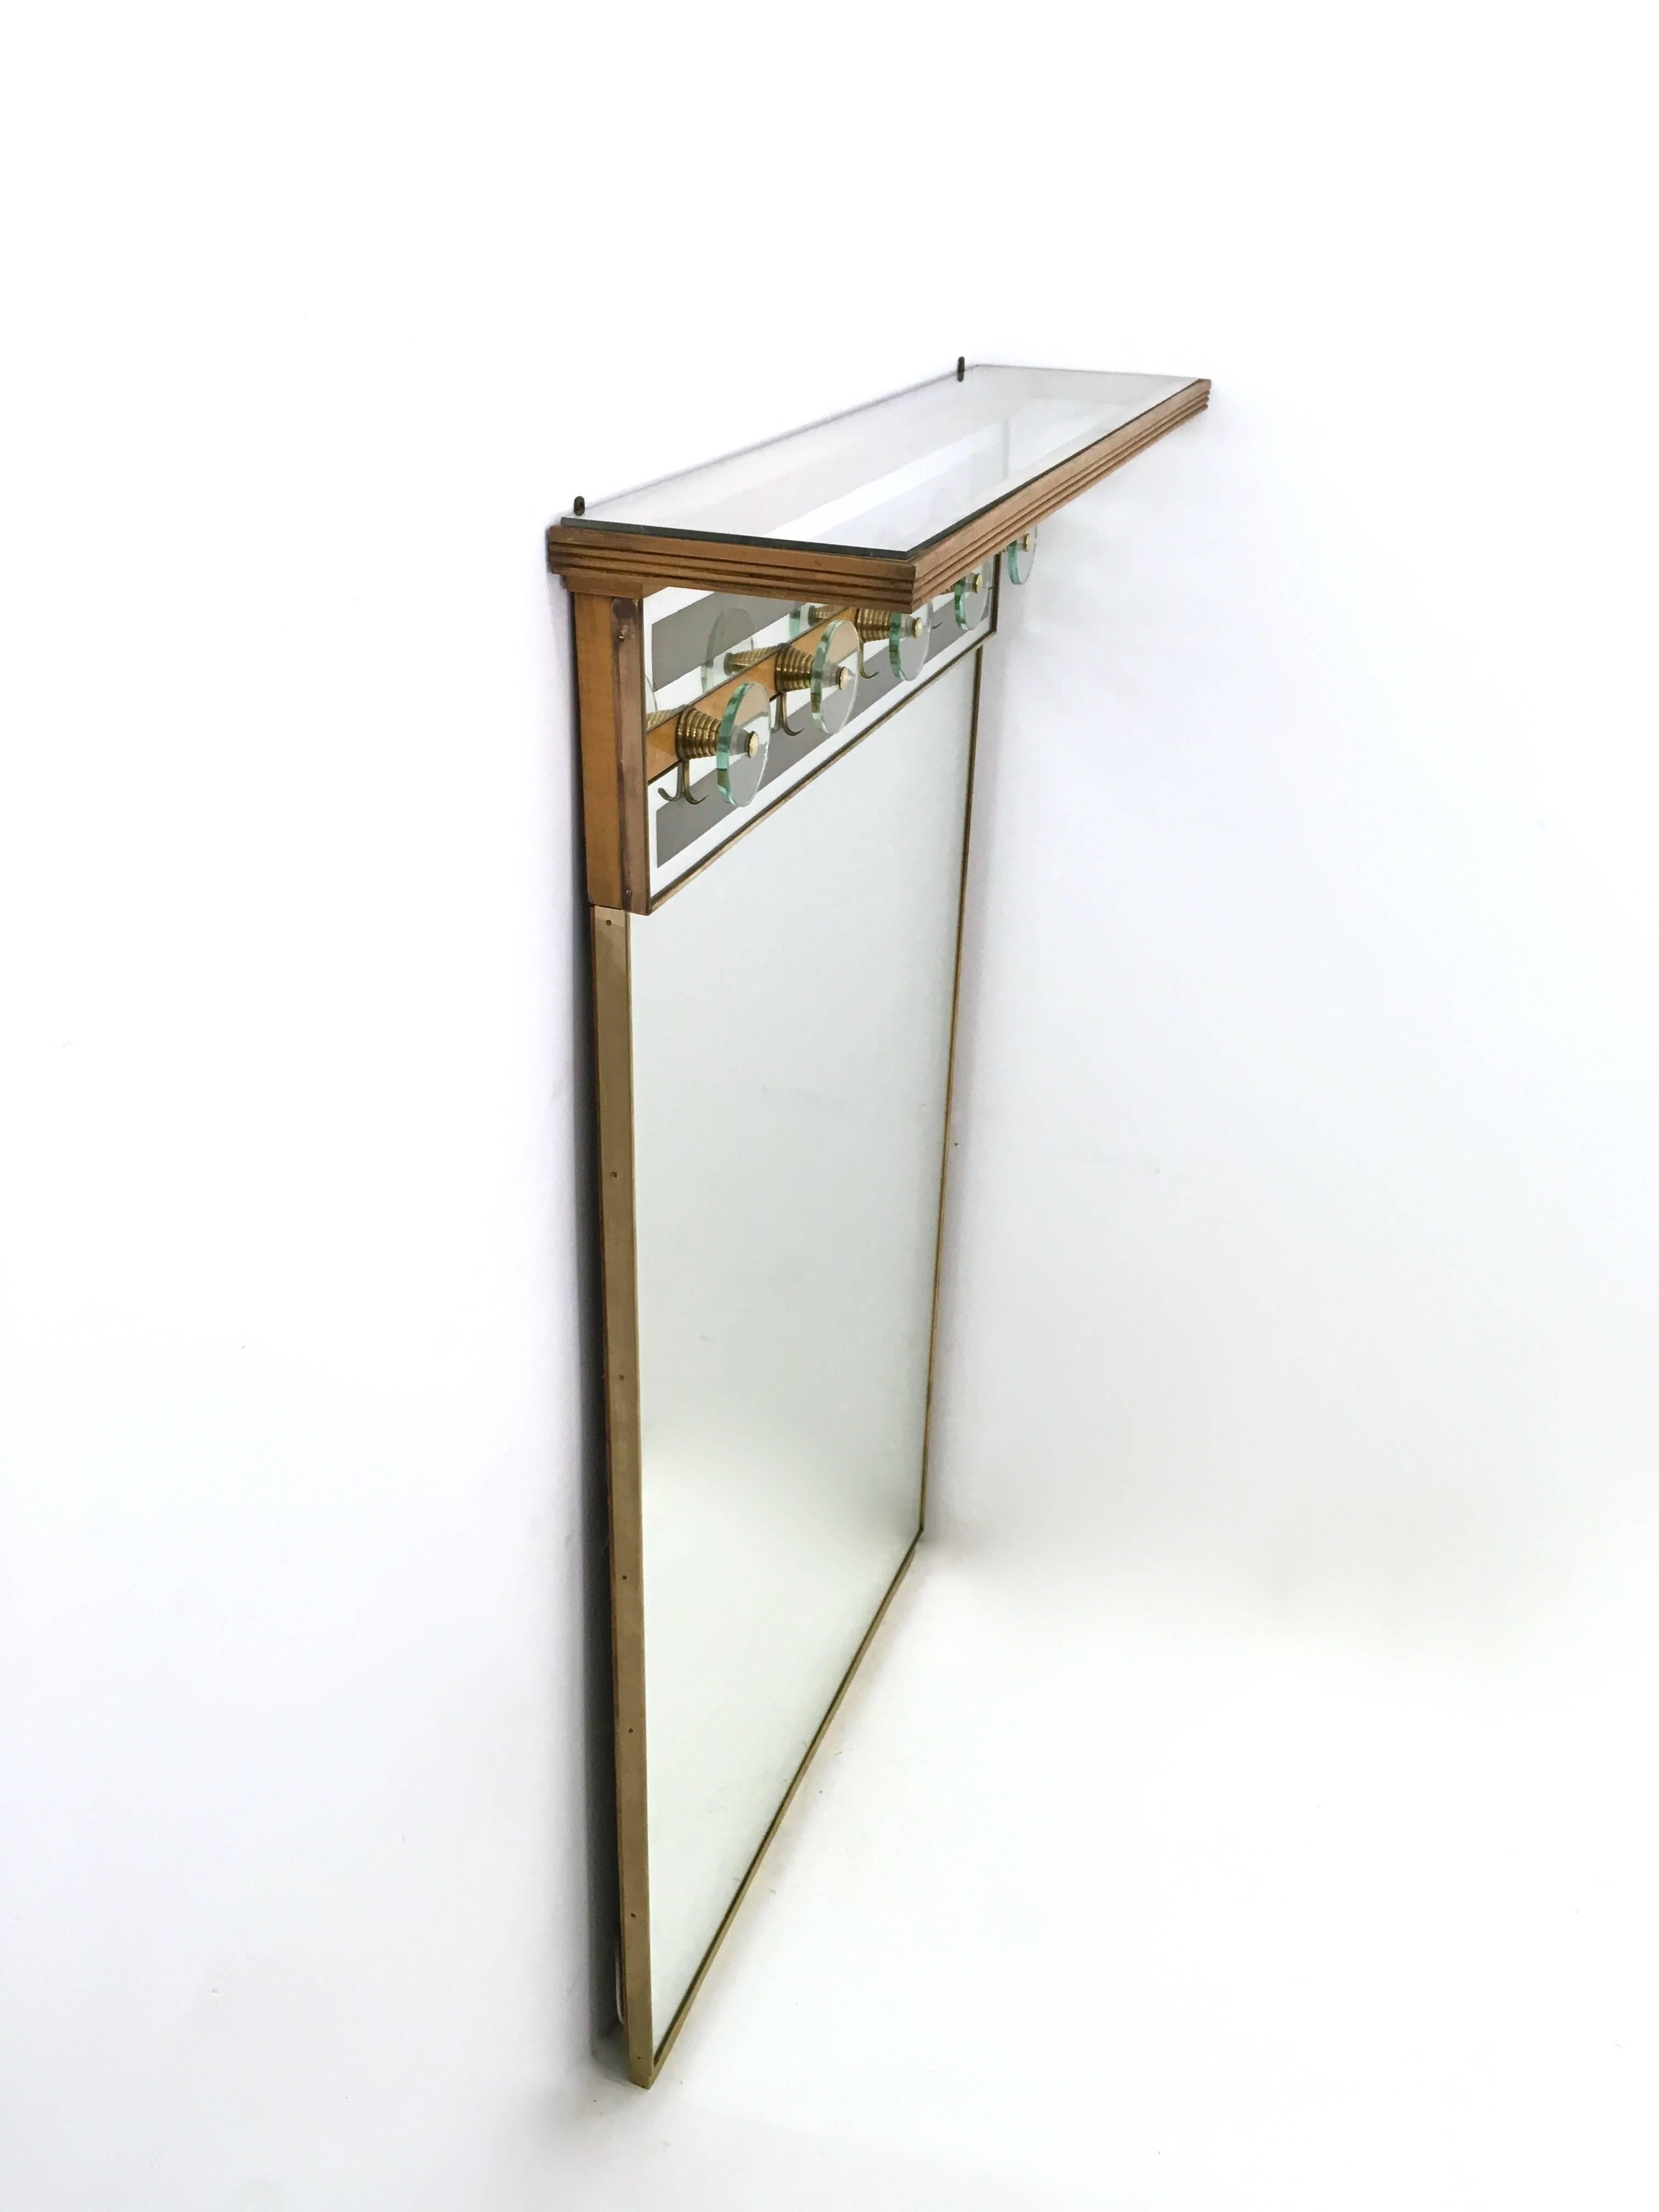 Midcentury Illuminated Coat Rack Ascribable to Fontana Arte, Italy, 1940s-1950s In Good Condition In Bresso, Lombardy